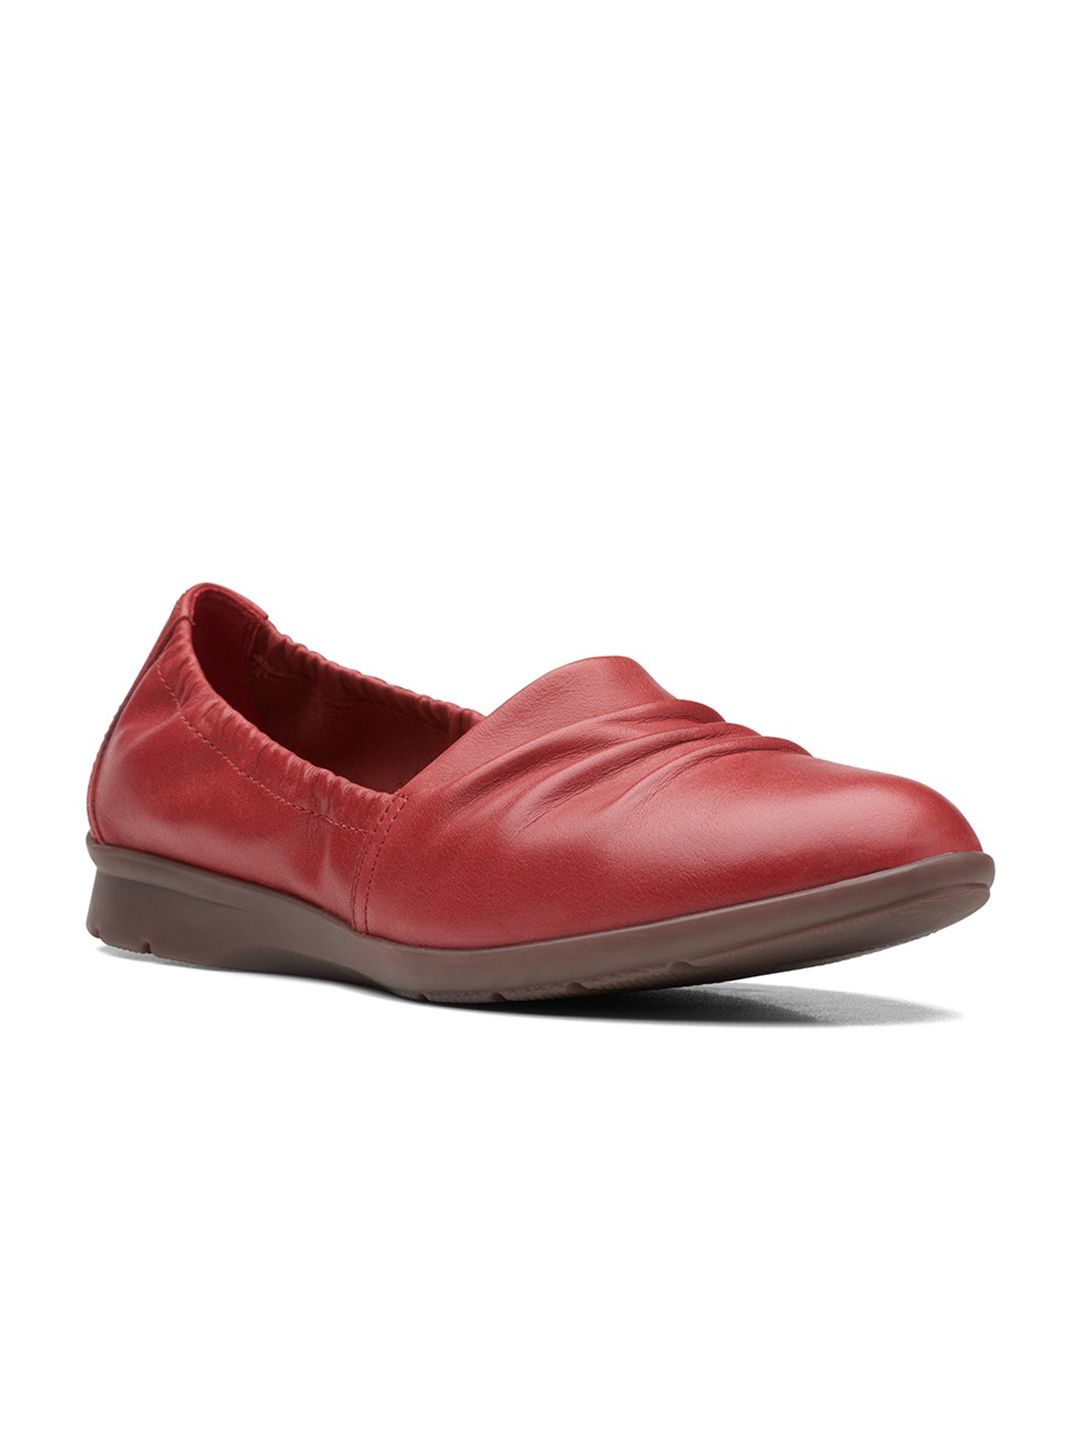 Clarks Women Red Leather Slip-On Sneakers Price in India